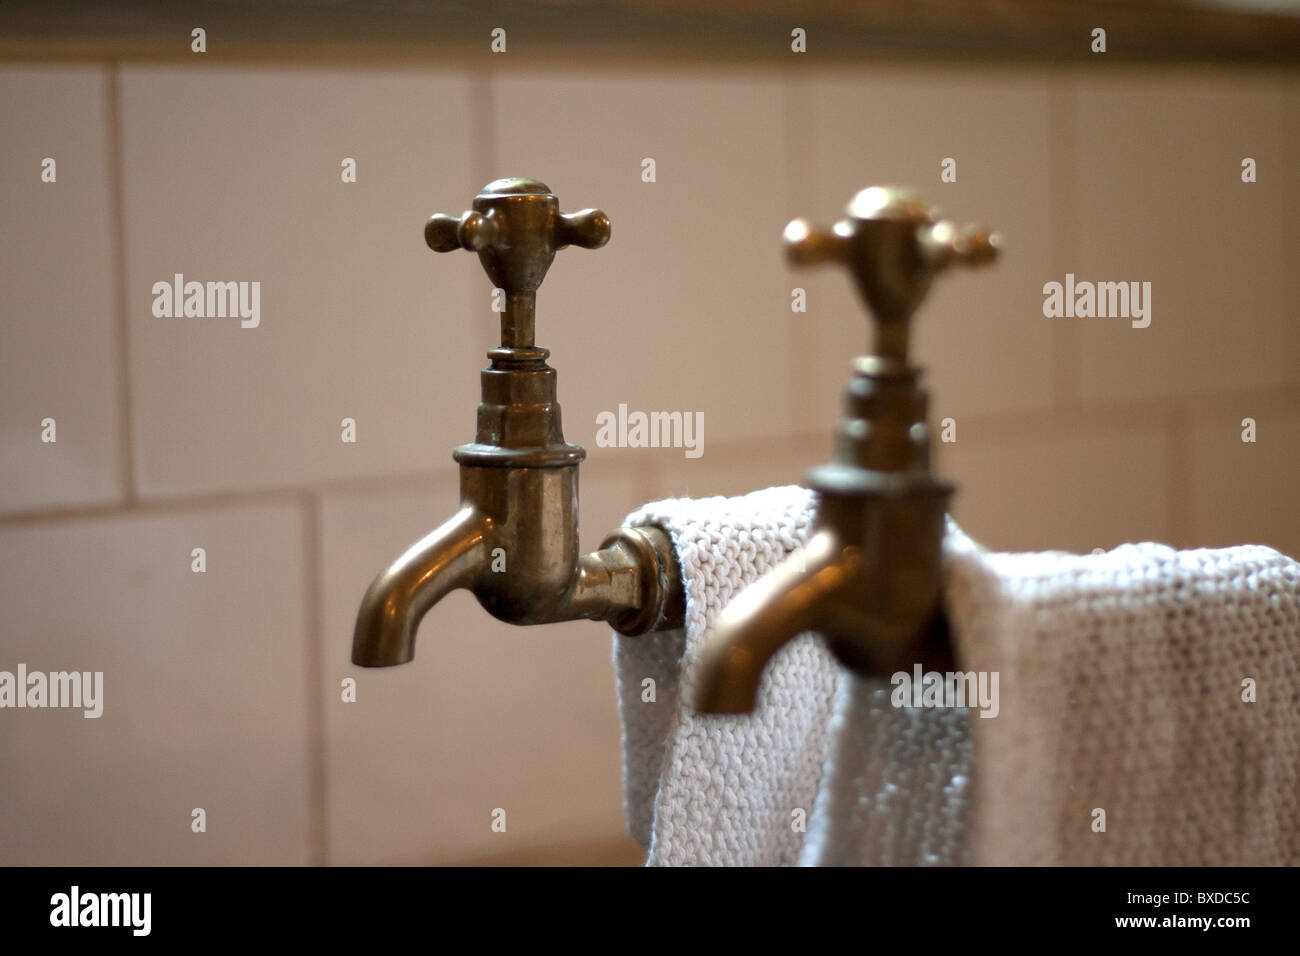 A pair of copper kitchen taps Stock Photo